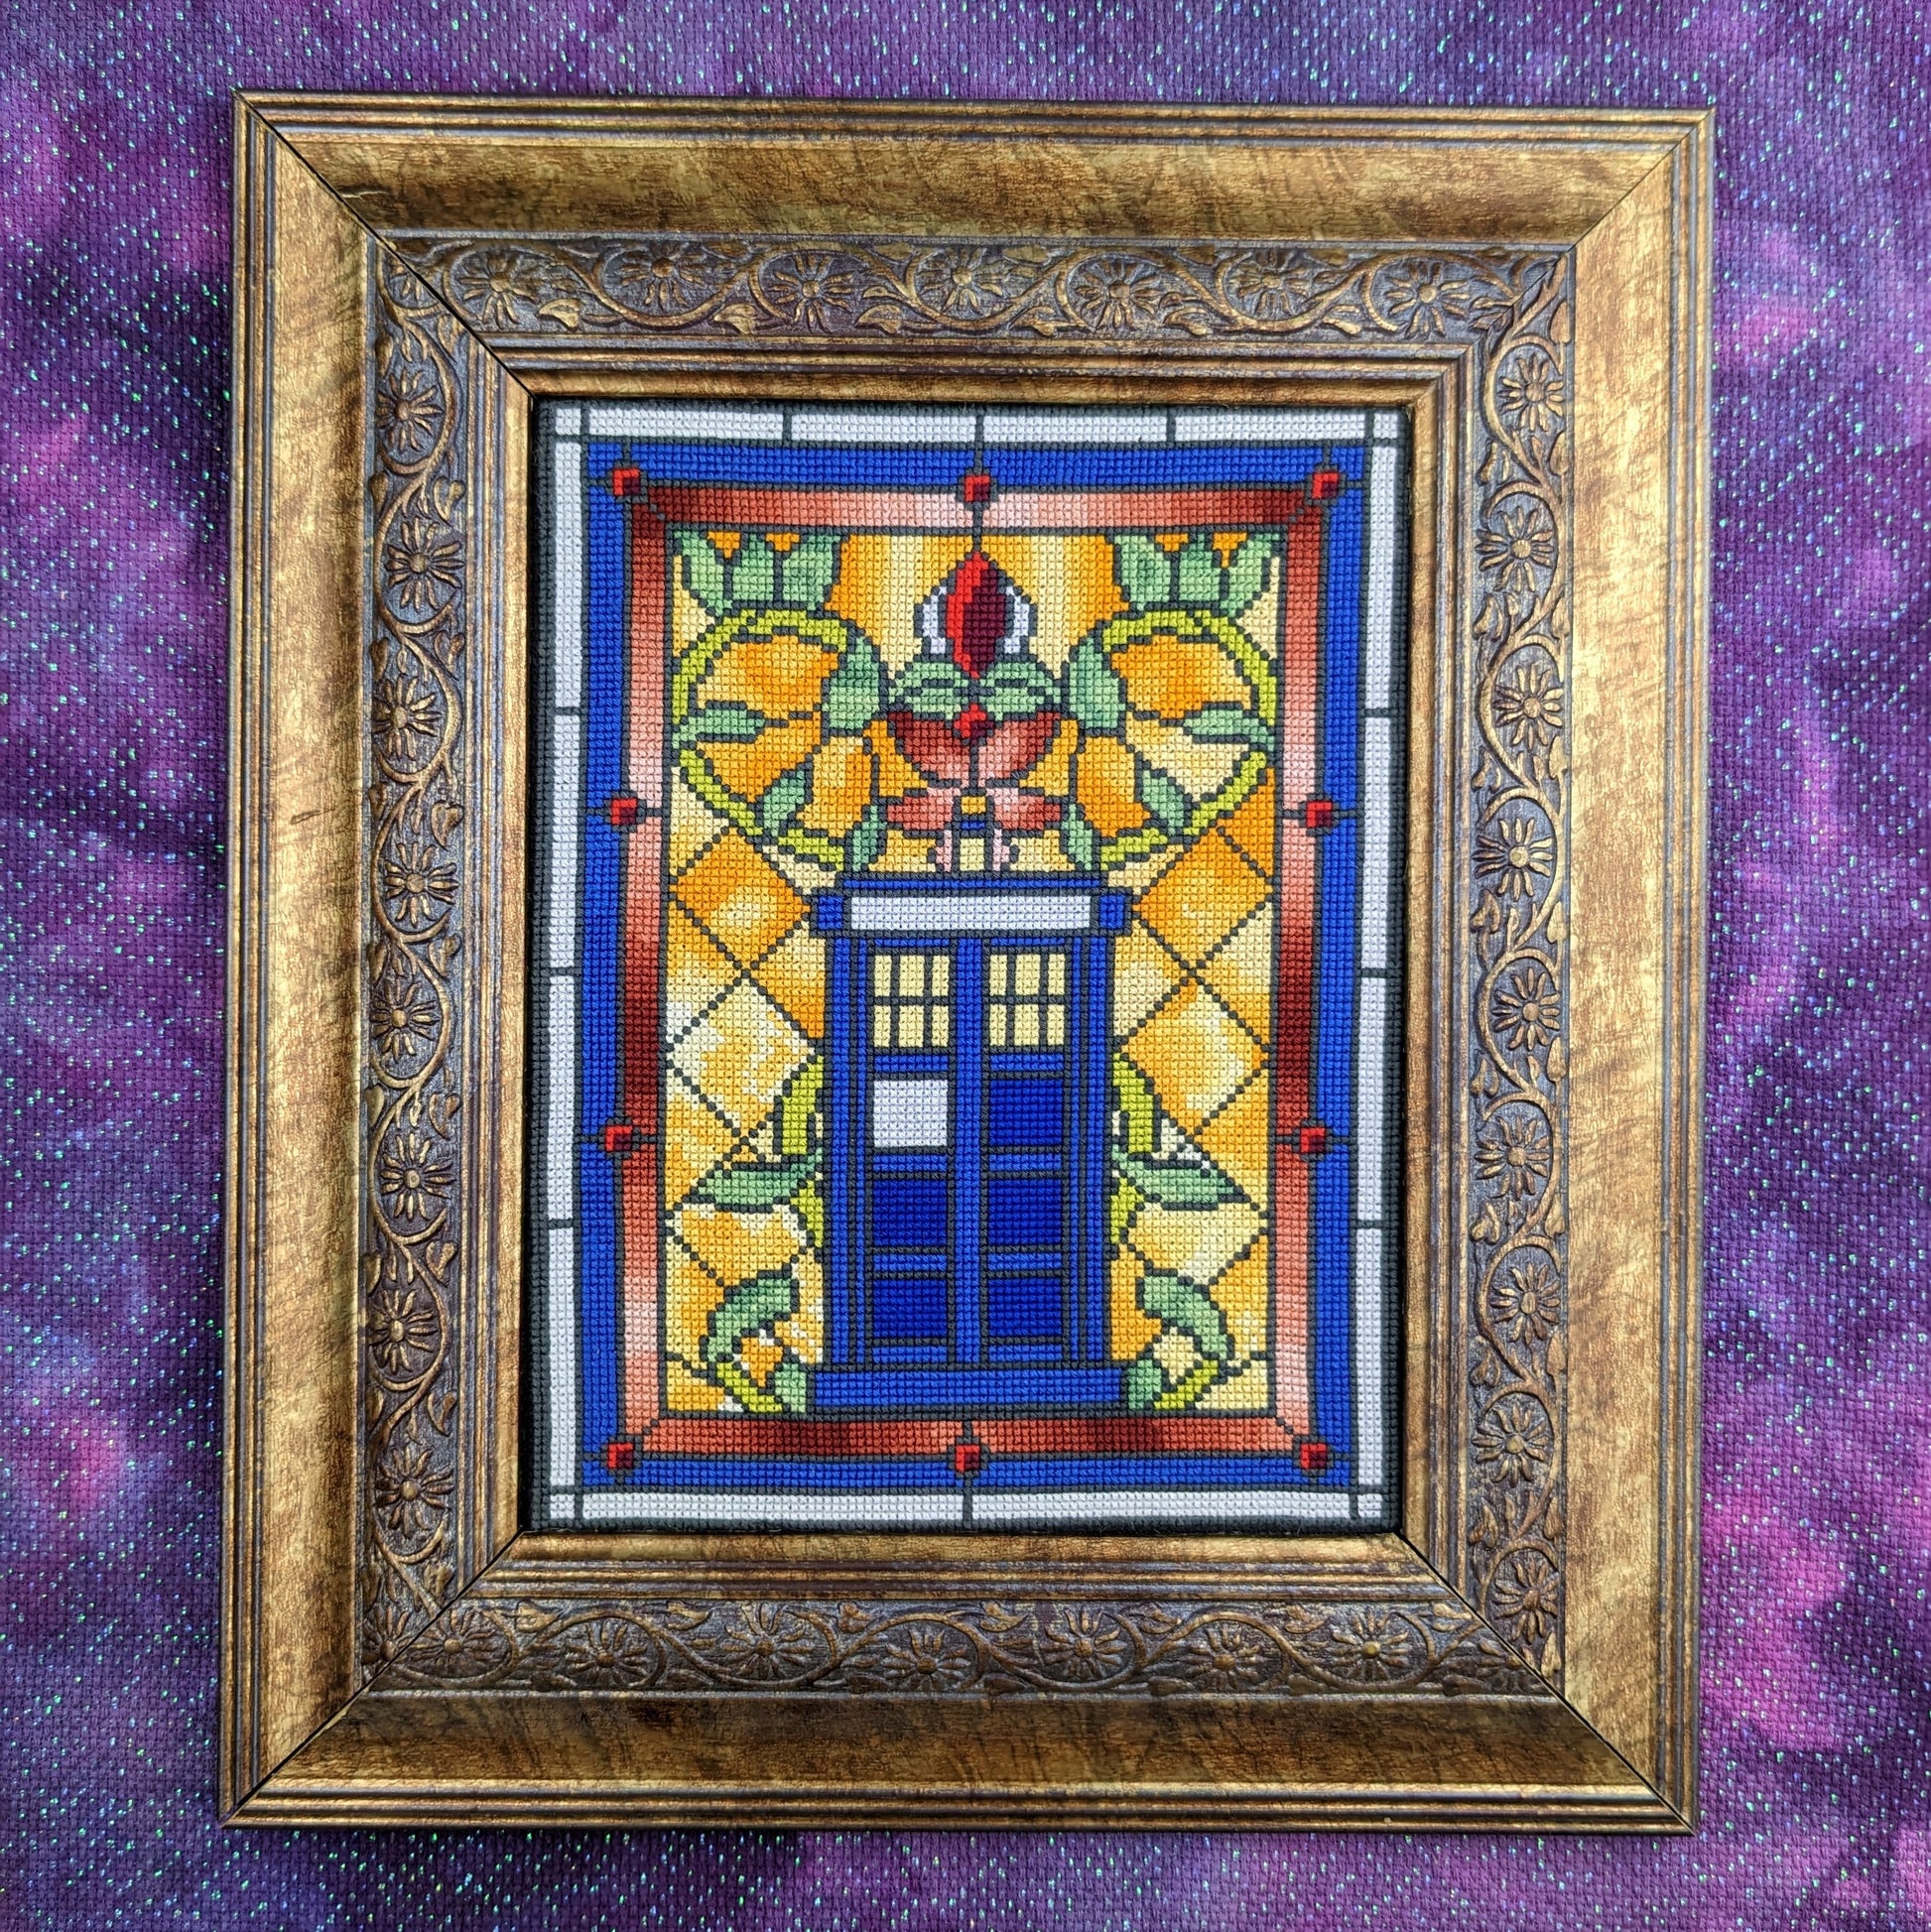 A picture of a cross stitch in an elaborate gold frame. The cross stitch imitates the look of a stained glass window with a TARDIS in the center of the frame, surrounded by vines.